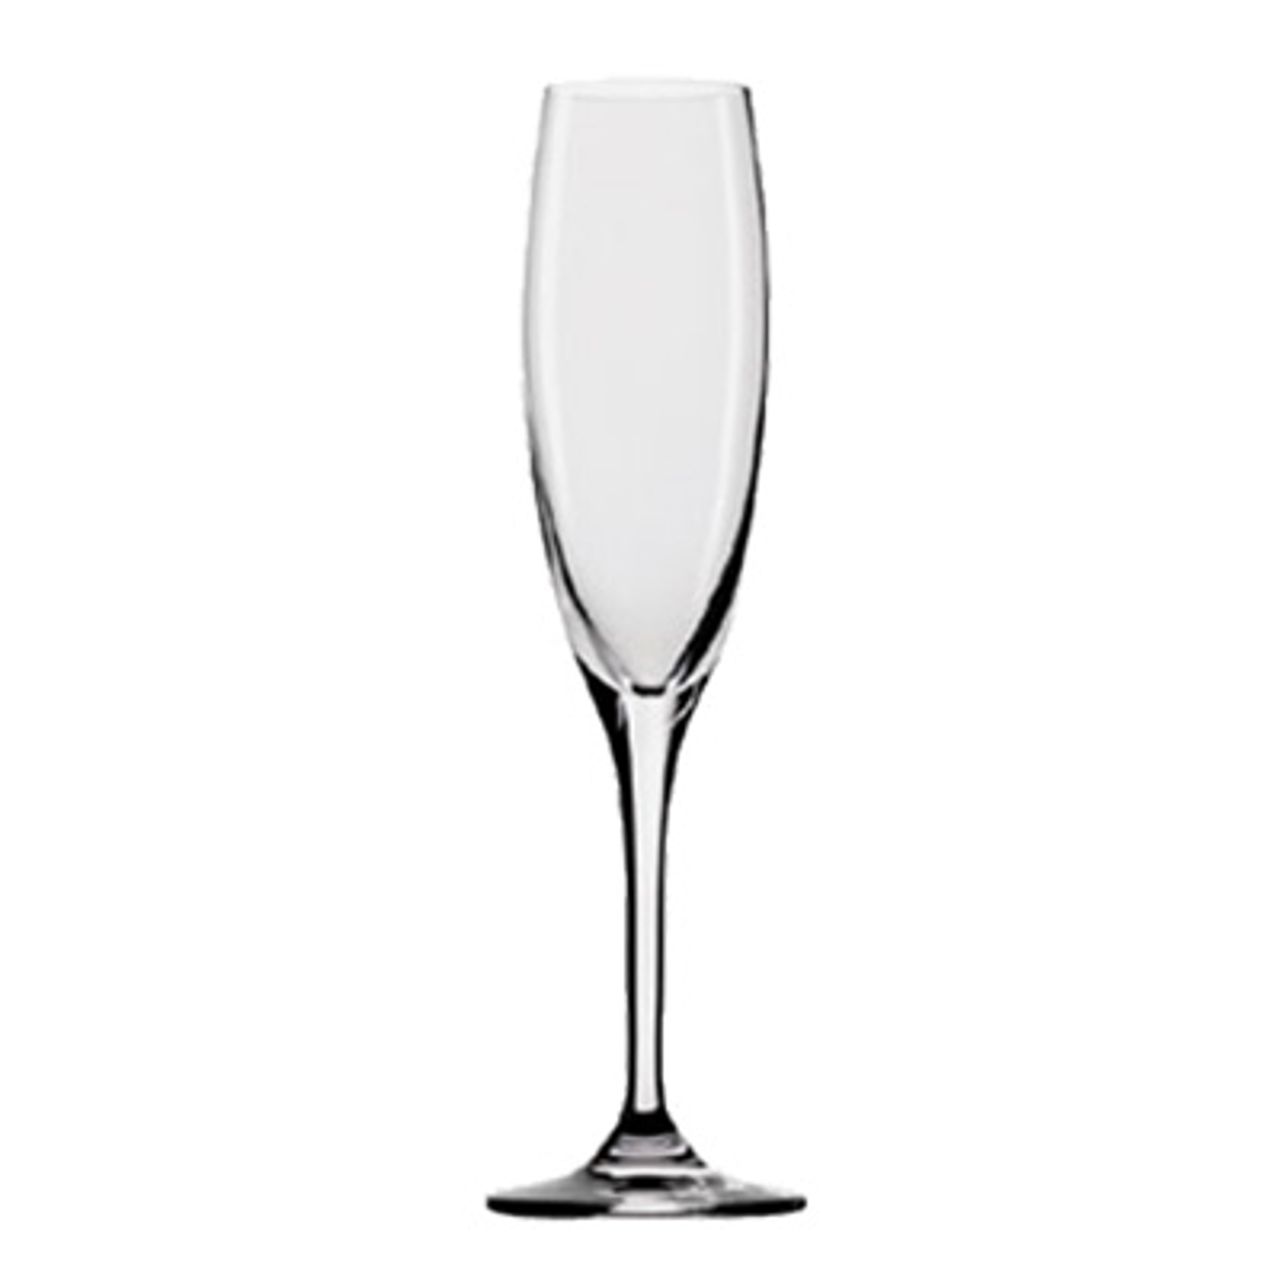 Libbey 3796 Embassy Royale Tall Champagne Flute, 6 oz